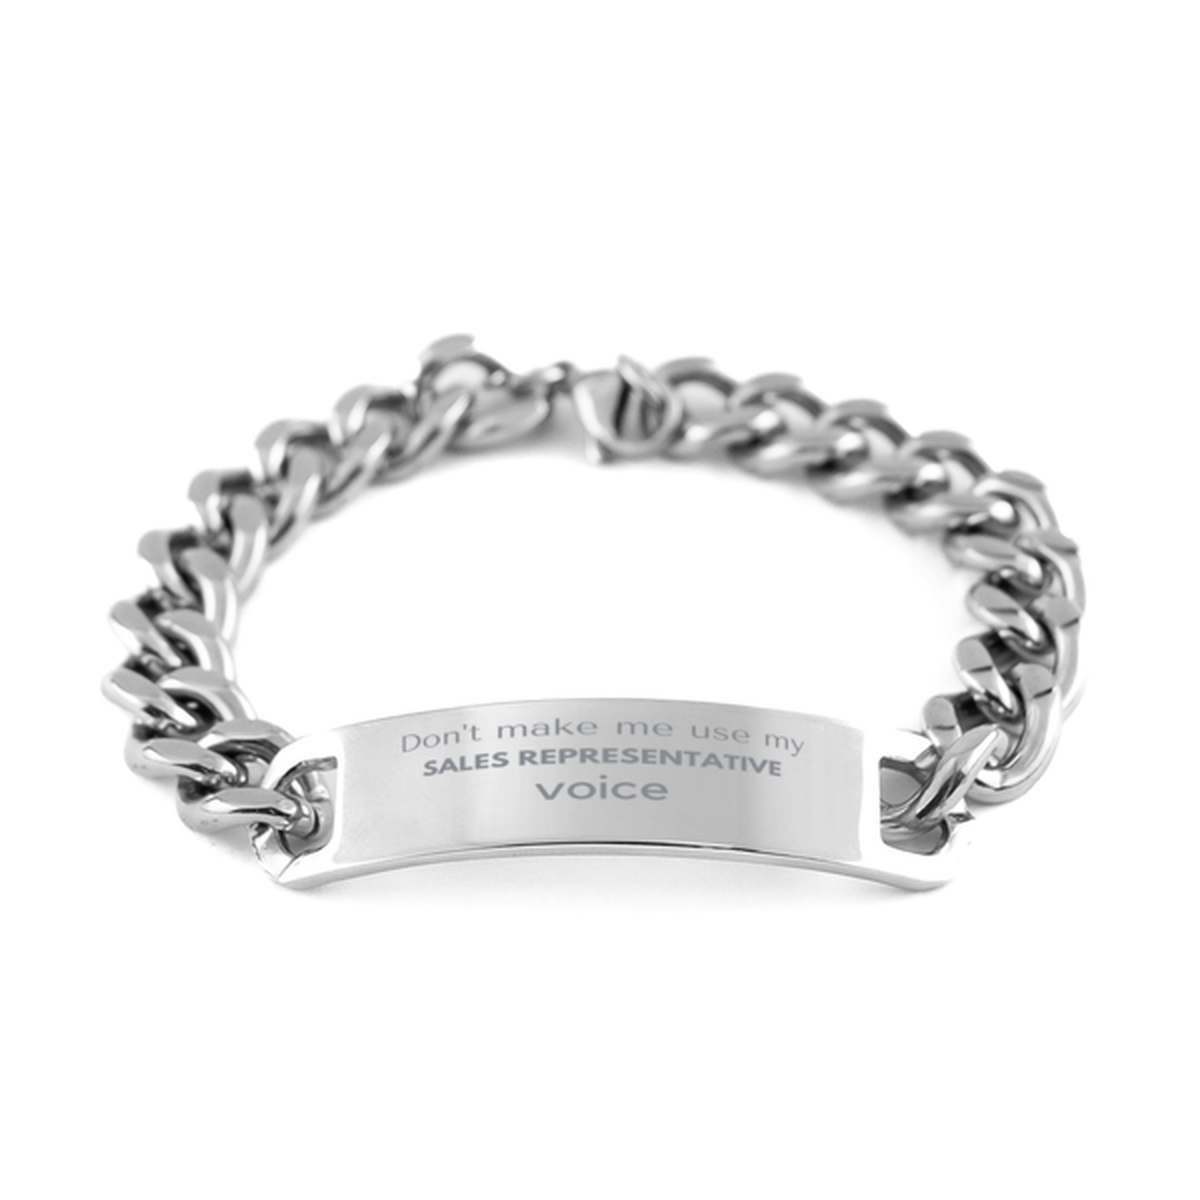 Don't make me use my Sales Representative voice, Sarcasm Sales Representative Gifts, Christmas Sales Representative Cuban Chain Stainless Steel Bracelet Birthday Unique Gifts For Sales Representative Coworkers, Men, Women, Colleague, Friends